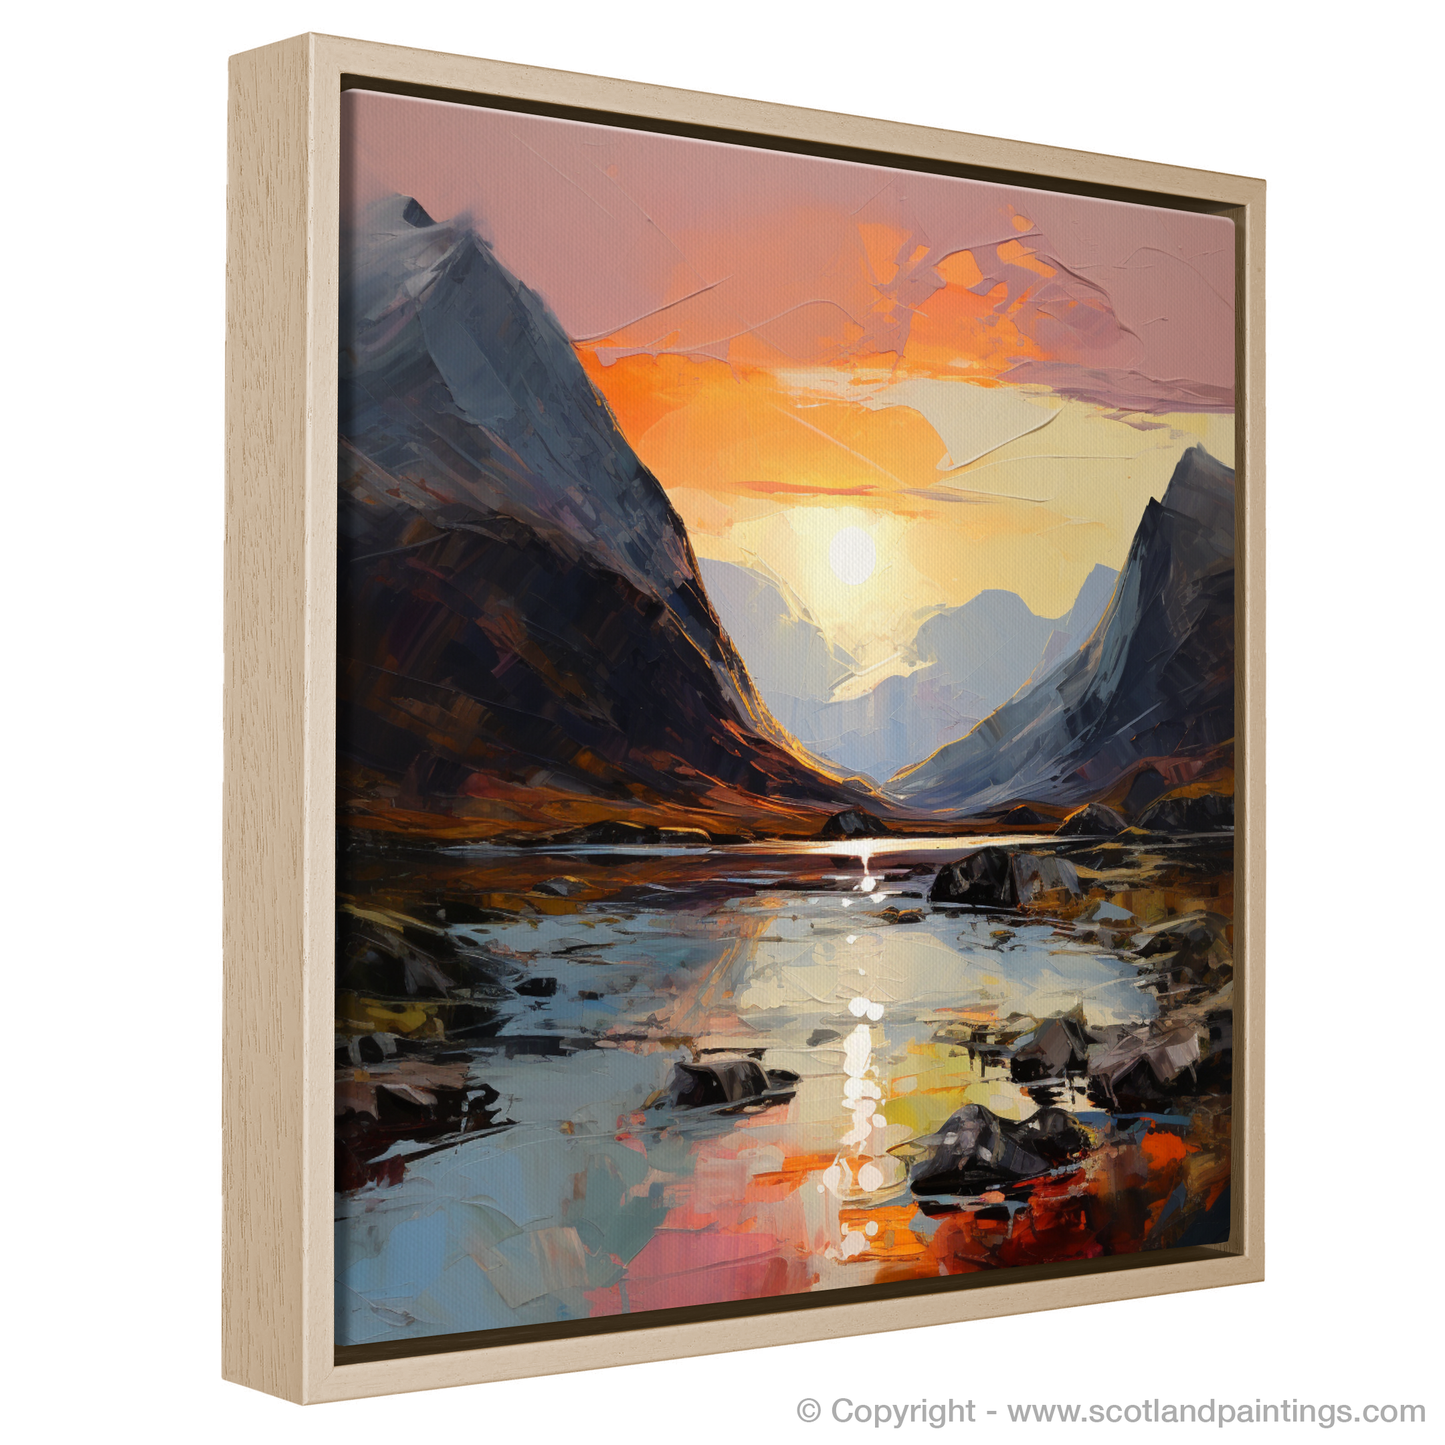 Painting and Art Print of Sunset glow in Glencoe entitled "Sunset Embers Over Glencoe Highlands".